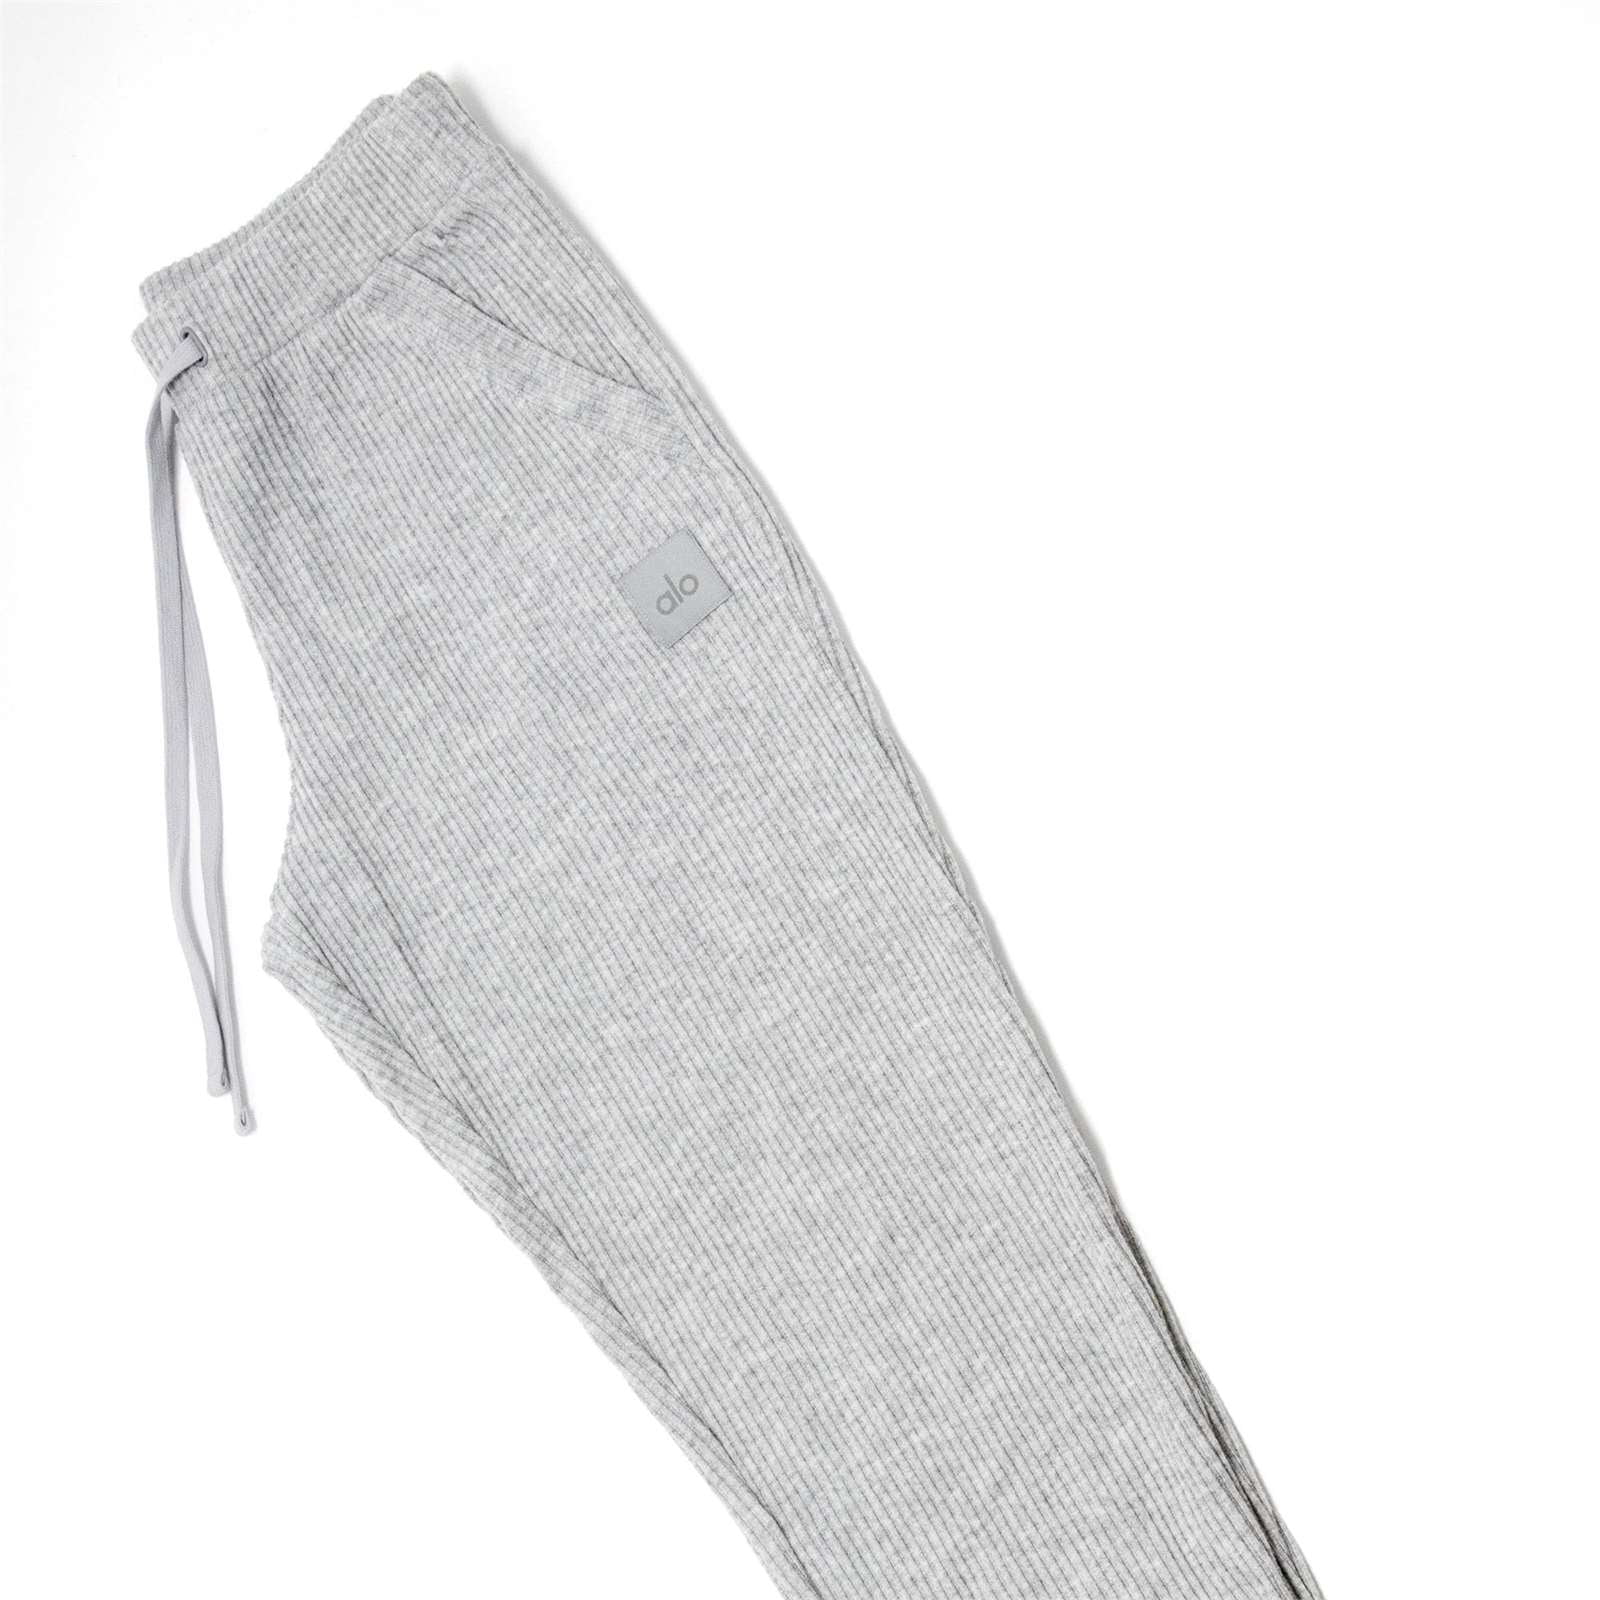 Alo Yoga Women's Muse Ribbed Sweatpants, Athletic Heather Gray,L